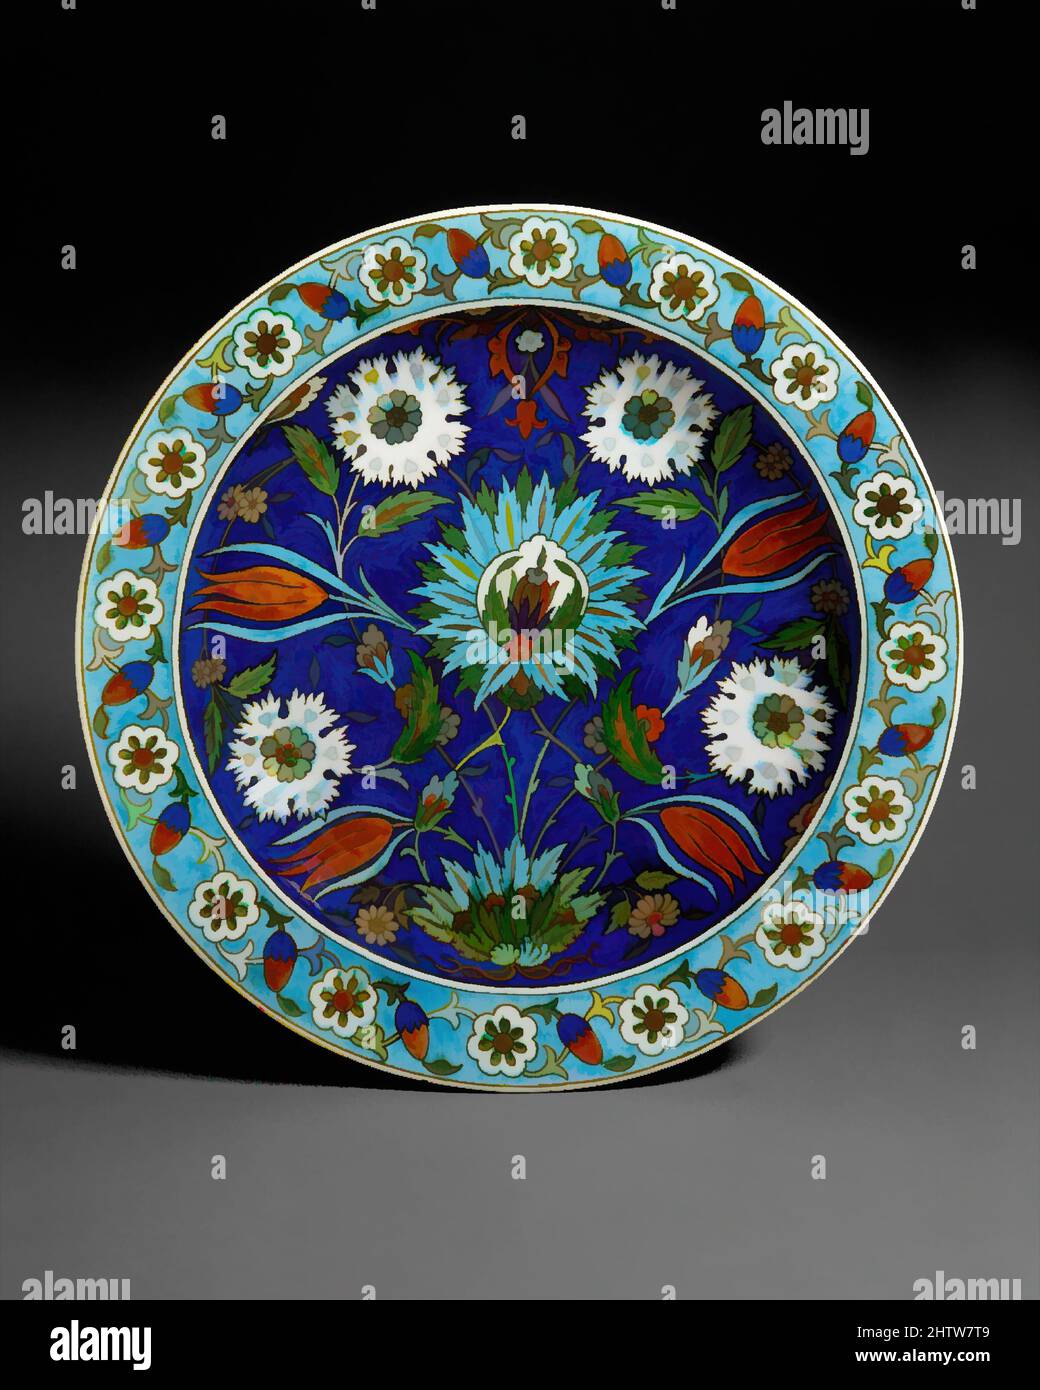 Art inspired by Dish, Joseph-Théodore Deck (French, 1823–1891), ca. 1870, French, Paris, Earthenware with underglaze and enamel polychrome decoration ('Persian' faience), Diameter: 16 1/8 in. (41 cm), Ceramics-Pottery, Joseph-Théodore Deck (French, 1823–1891), The decoration of this, Classic works modernized by Artotop with a splash of modernity. Shapes, color and value, eye-catching visual impact on art. Emotions through freedom of artworks in a contemporary way. A timeless message pursuing a wildly creative new direction. Artists turning to the digital medium and creating the Artotop NFT Stock Photo